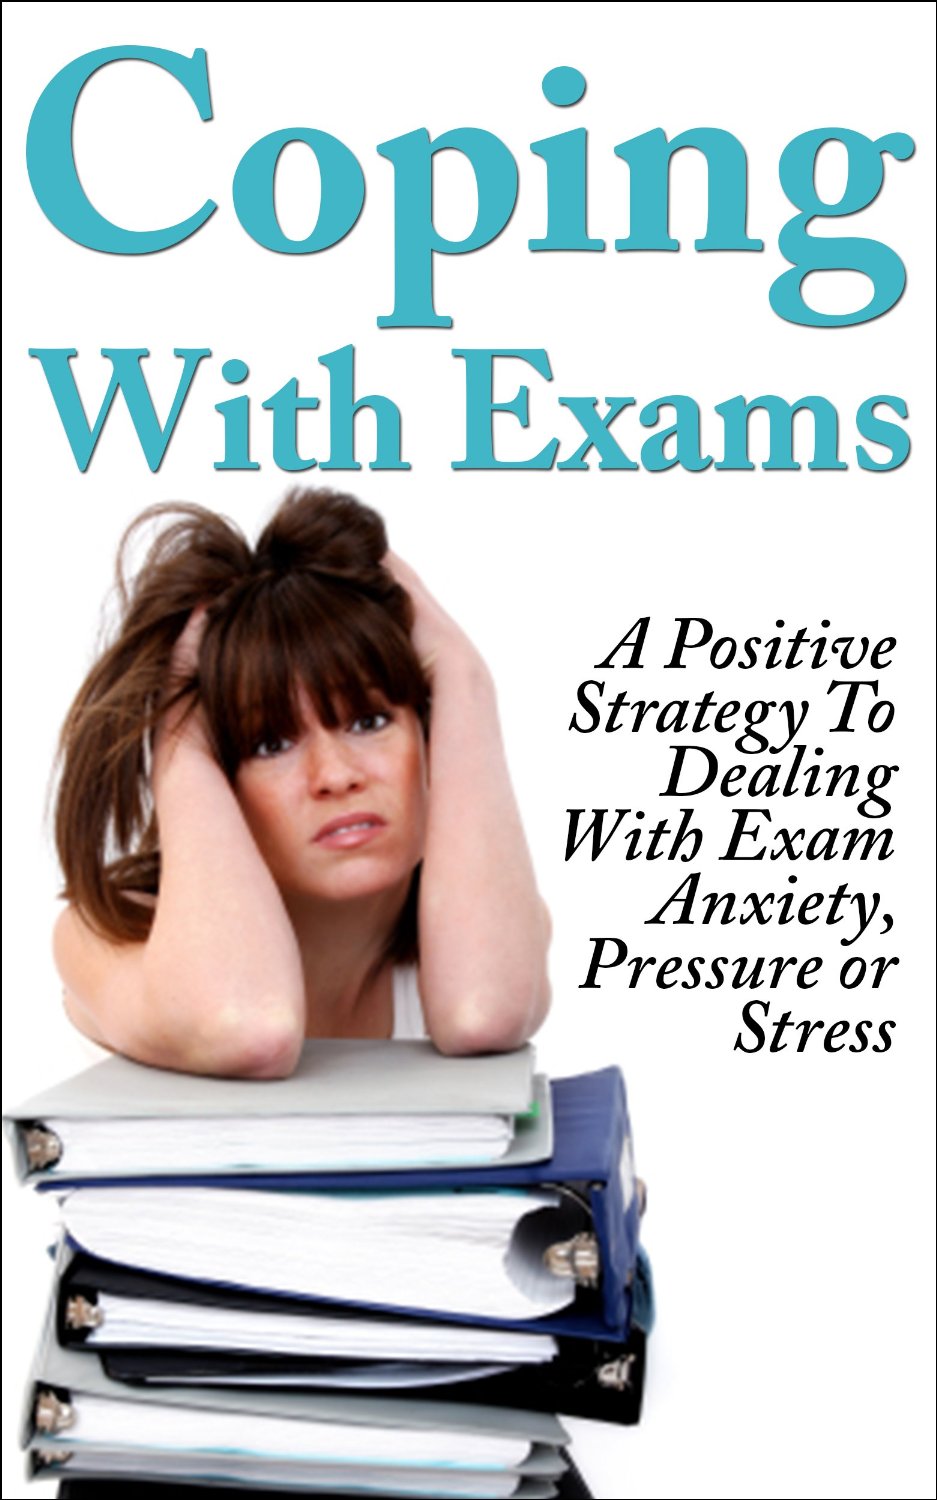 Coping With Exams: A Positive Stratergy To Dealing With Exam Anxiety, Pressure or Stress by Matt Price